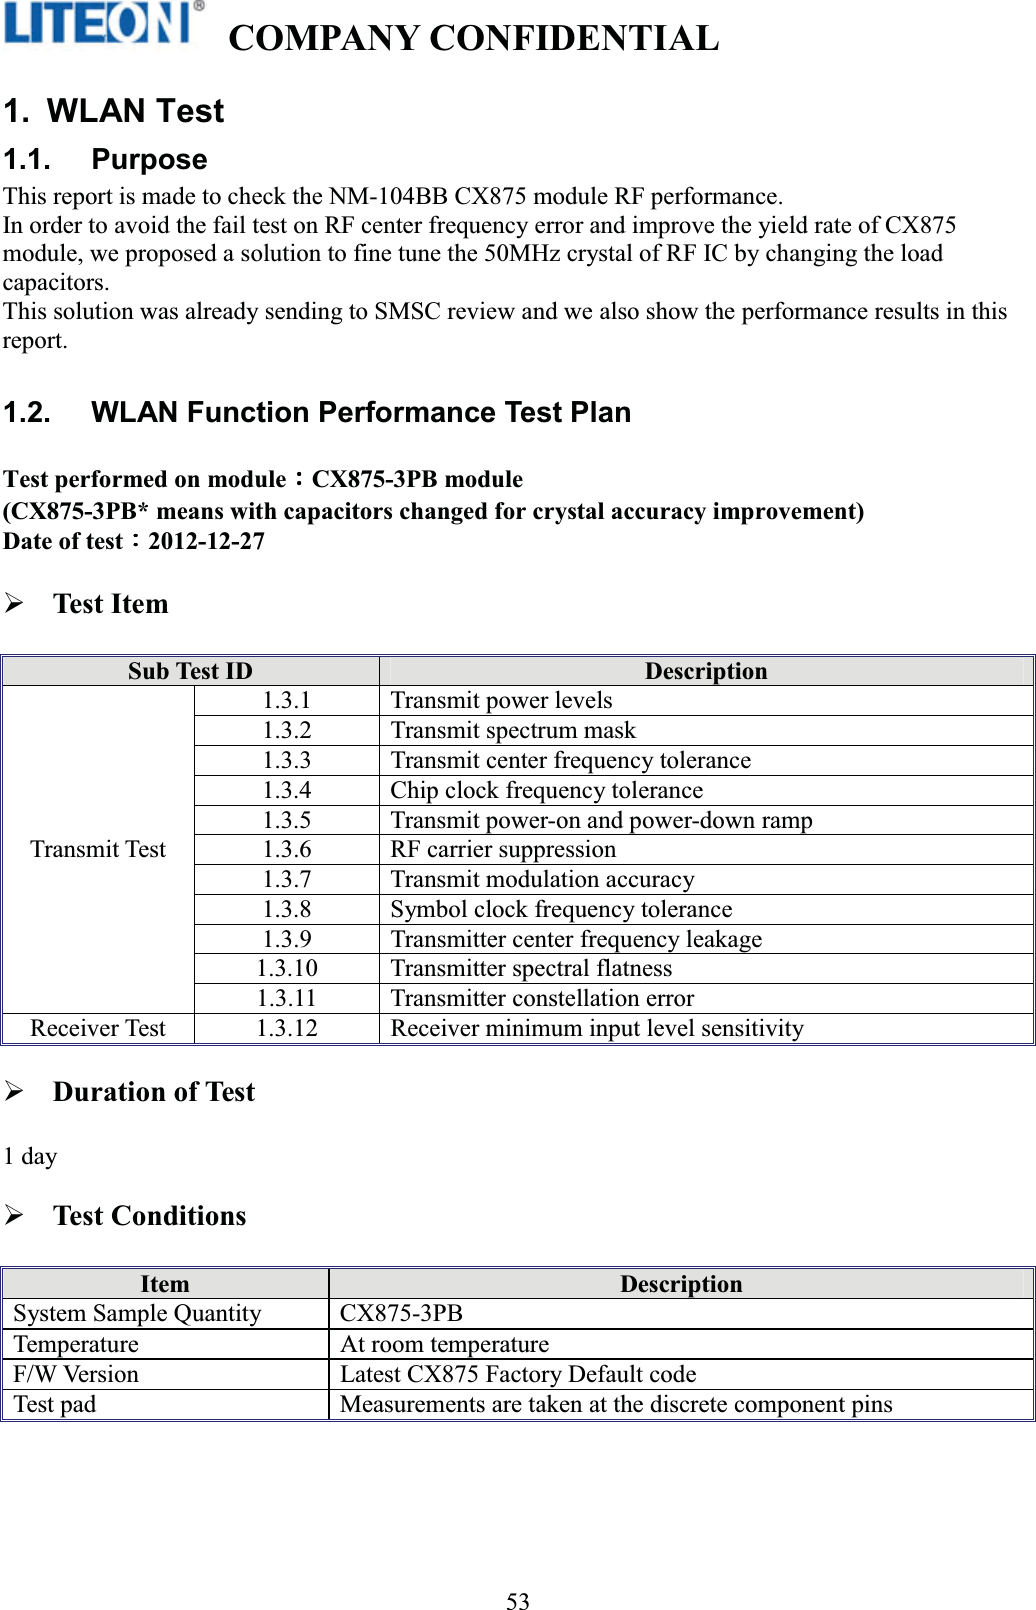   COMPANY CONFIDENTIAL   !531. WLAN Test 1.1. Purpose This report is made to check the NM-104BB CX875 module RF performance. In order to avoid the fail test on RF center frequency error and improve the yield rate of CX875 module, we proposed a solution to fine tune the 50MHz crystal of RF IC by changing the load capacitors. This solution was already sending to SMSC review and we also show the performance results in this report. 1.2.  WLAN Function Performance Test Plan Test performed on moduleΚΚΚΚCX875-3PB module   (CX875-3PB* means with capacitors changed for crystal accuracy improvement) Date of testΚΚΚΚ2012-12-27 Test Item Sub Test ID  Description Transmit Test 1.3.1  Transmit power levels 1.3.2  Transmit spectrum mask 1.3.3  Transmit center frequency tolerance 1.3.4  Chip clock frequency tolerance 1.3.5  Transmit power-on and power-down ramp 1.3.6  RF carrier suppression 1.3.7  Transmit modulation accuracy 1.3.8  Symbol clock frequency tolerance 1.3.9  Transmitter center frequency leakage 1.3.10  Transmitter spectral flatness 1.3.11  Transmitter constellation error Receiver Test  1.3.12  Receiver minimum input level sensitivity Duration of Test 1 dayTest Conditions Item  Description System Sample Quantity  CX875-3PB   Temperature  At room temperature F/W Version  Latest CX875 Factory Default code Test pad  Measurements are taken at the discrete component pins 